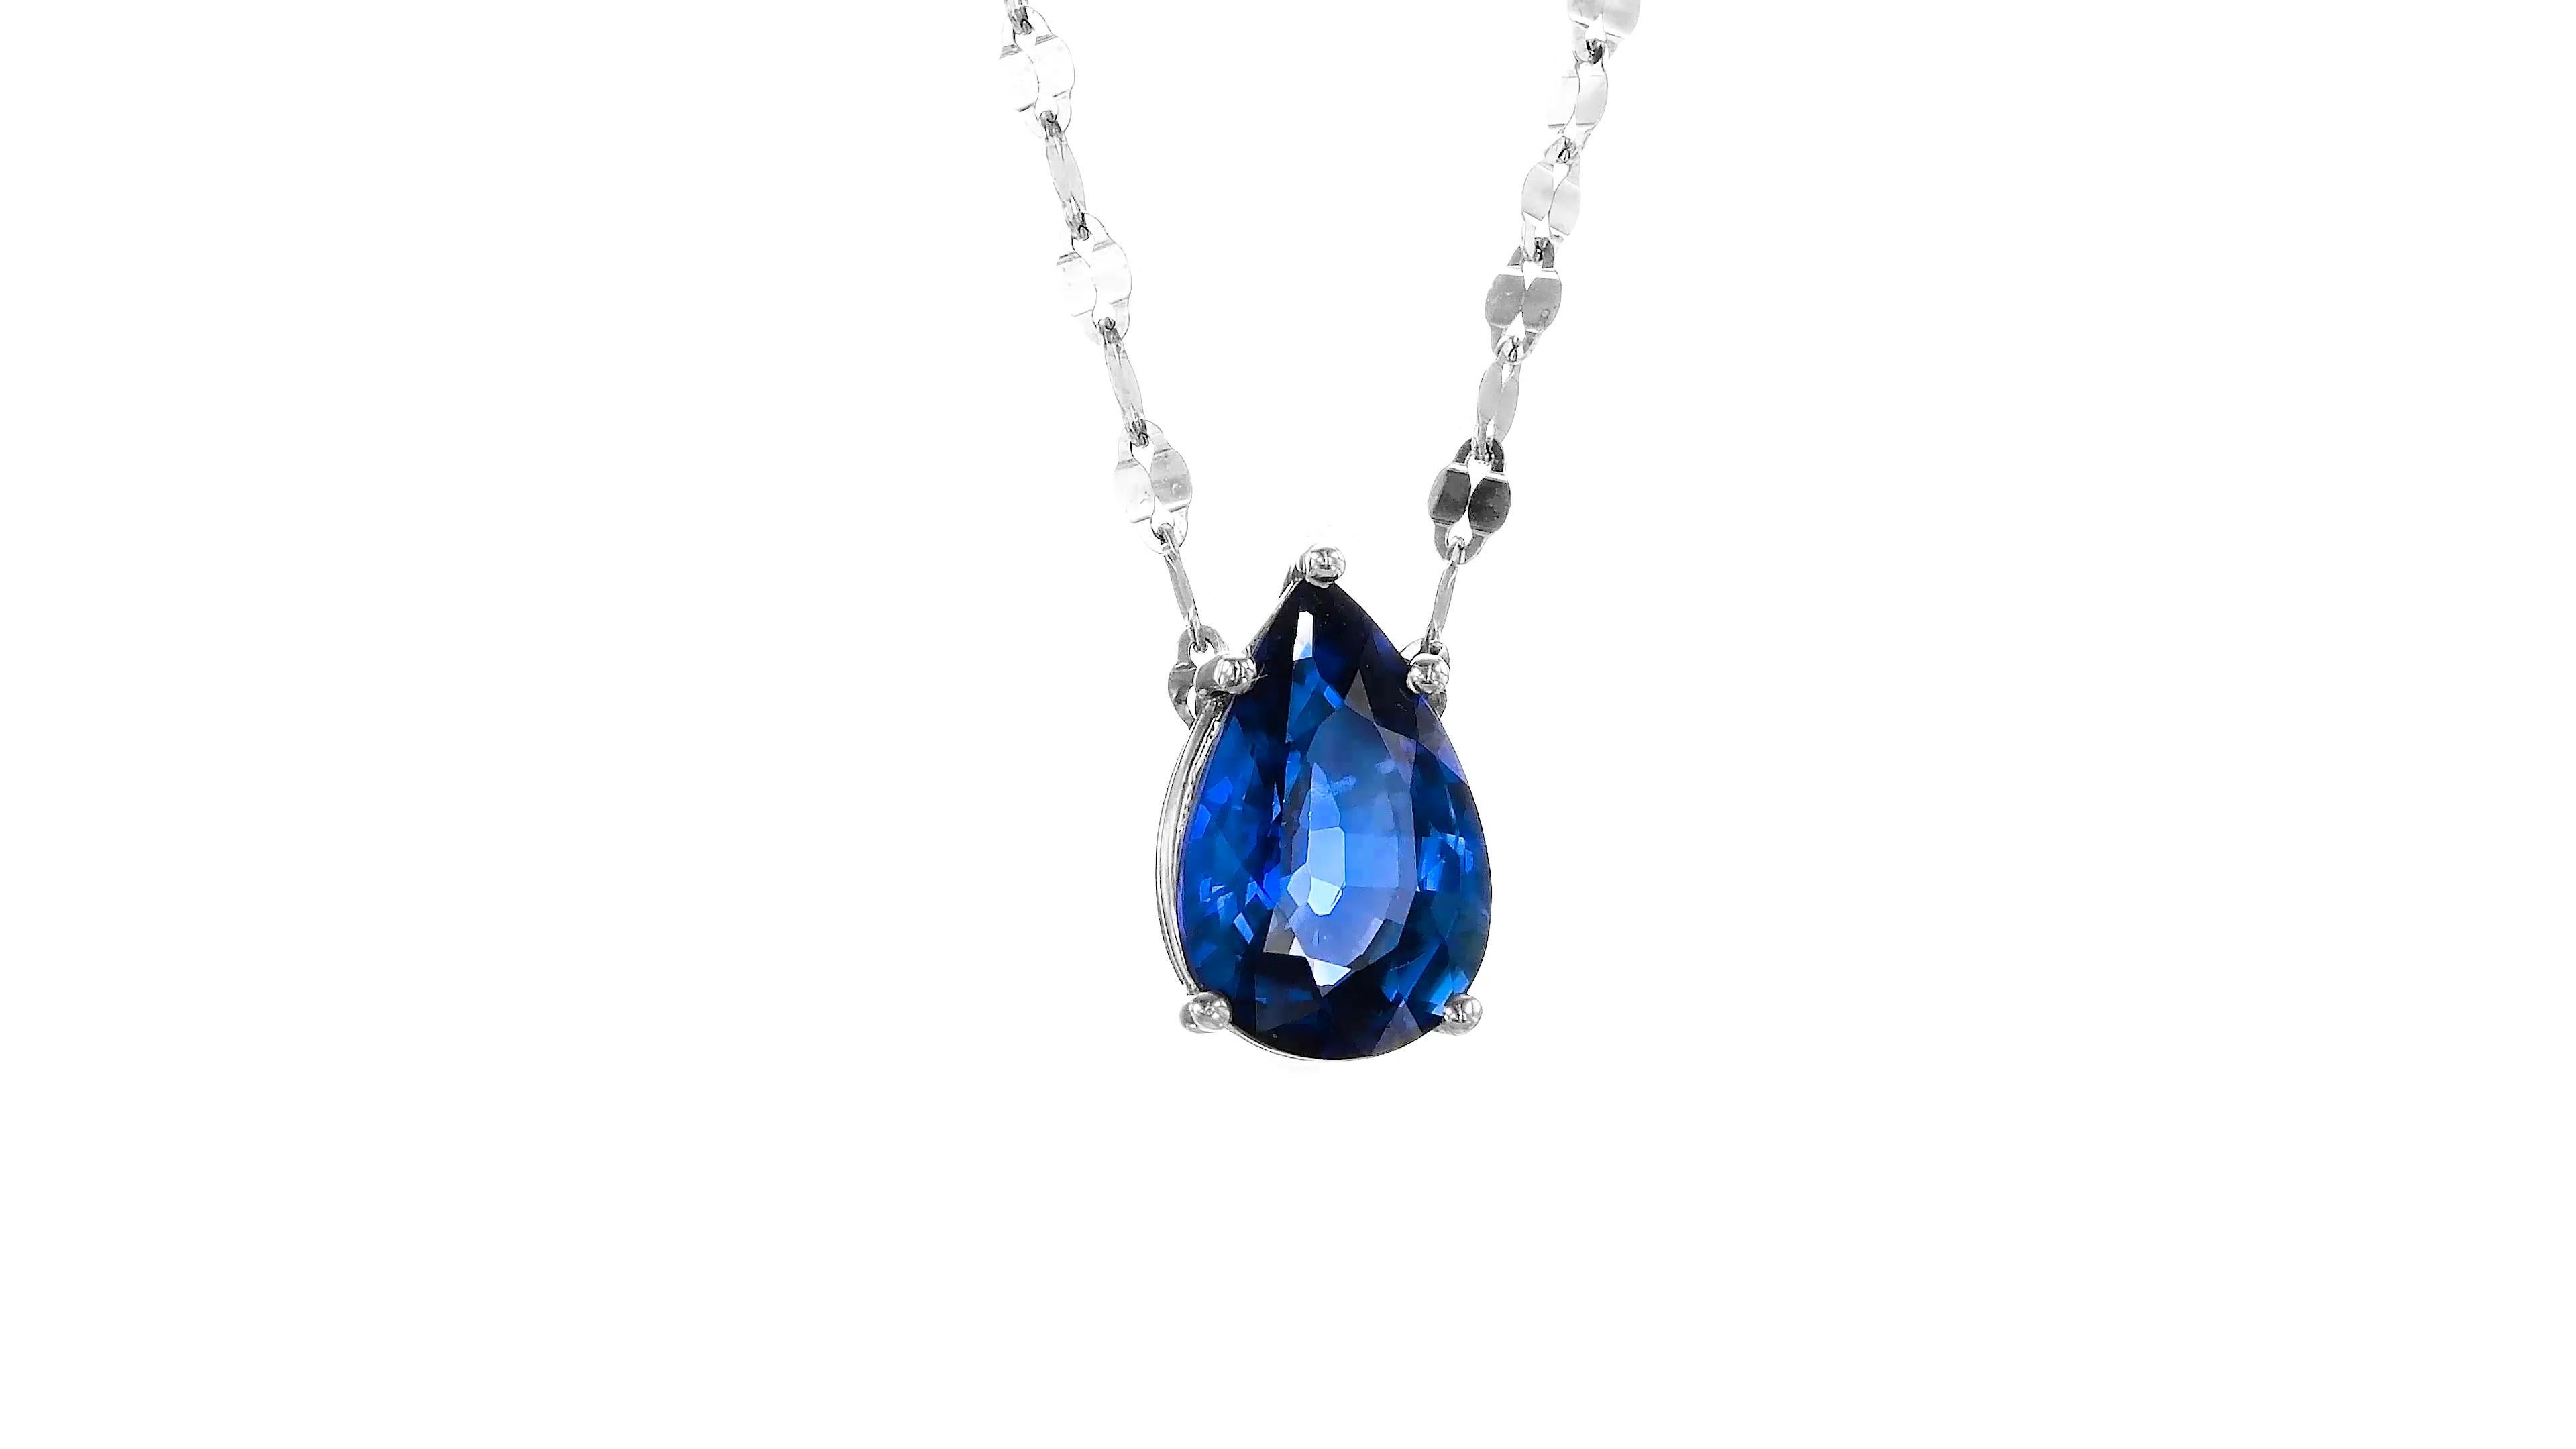 Handcrafted 3 carat vivid blue natural sapphire pendant with timeless elegant allure that will compliment any outfit. The Sapphire is securely set with 5 prongs on a 14K White Gold and complimented by a gorgeous 12.75 inches White Gold necklace.